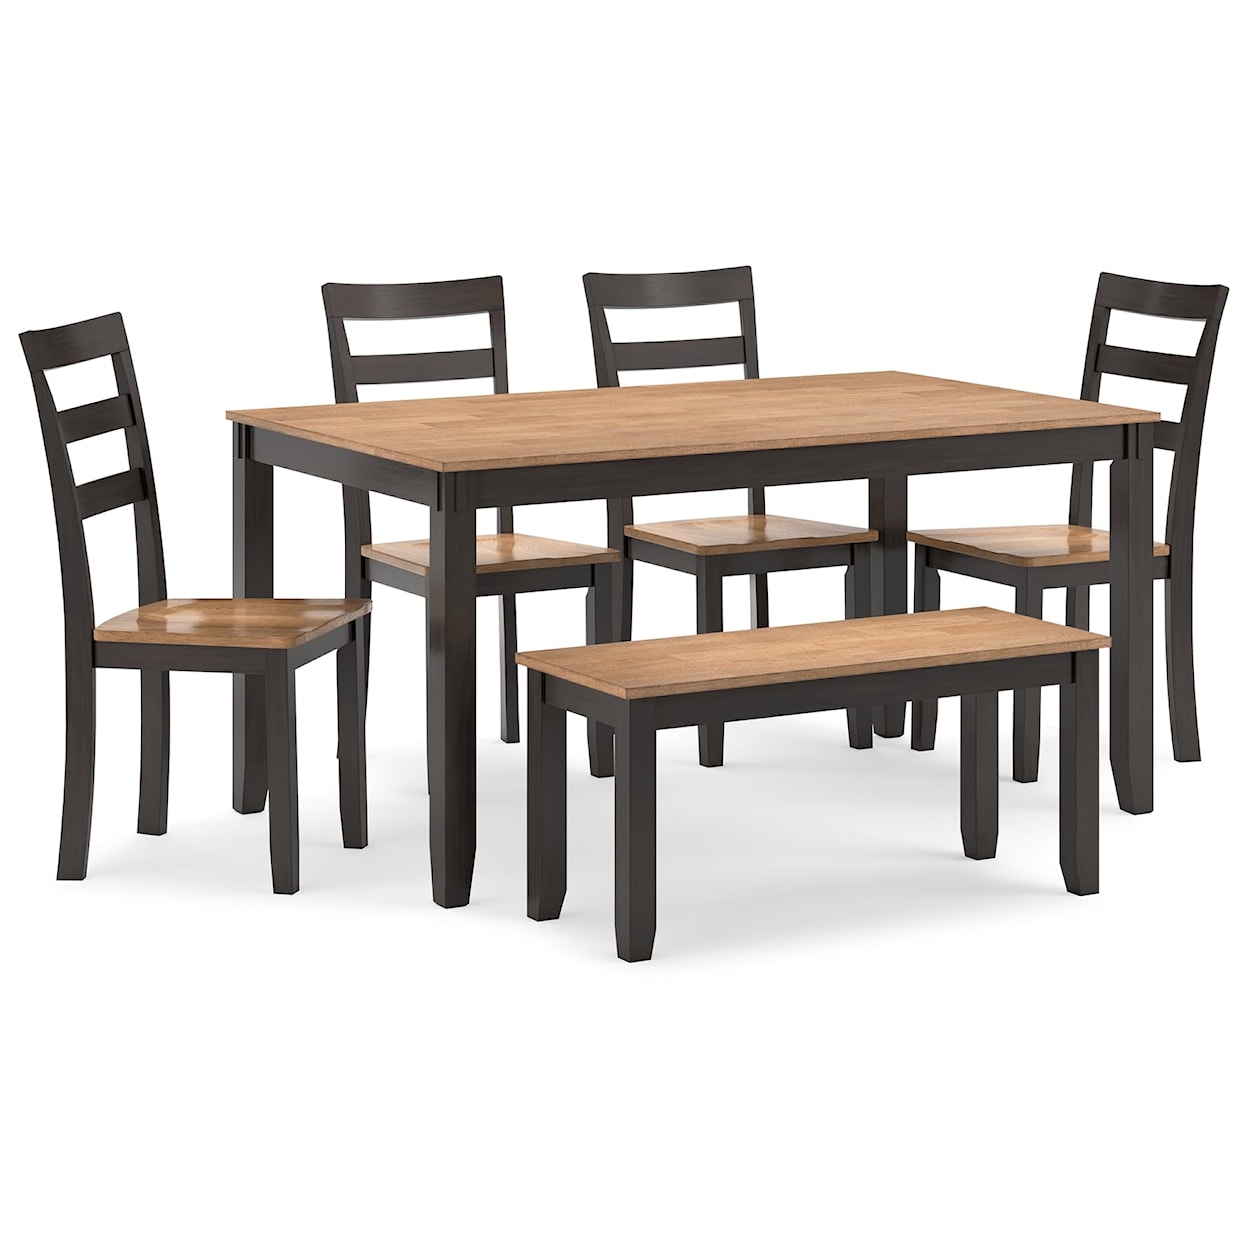 Signature Design by Ashley Gesthaven Dining Room Table Set (Set of 6)